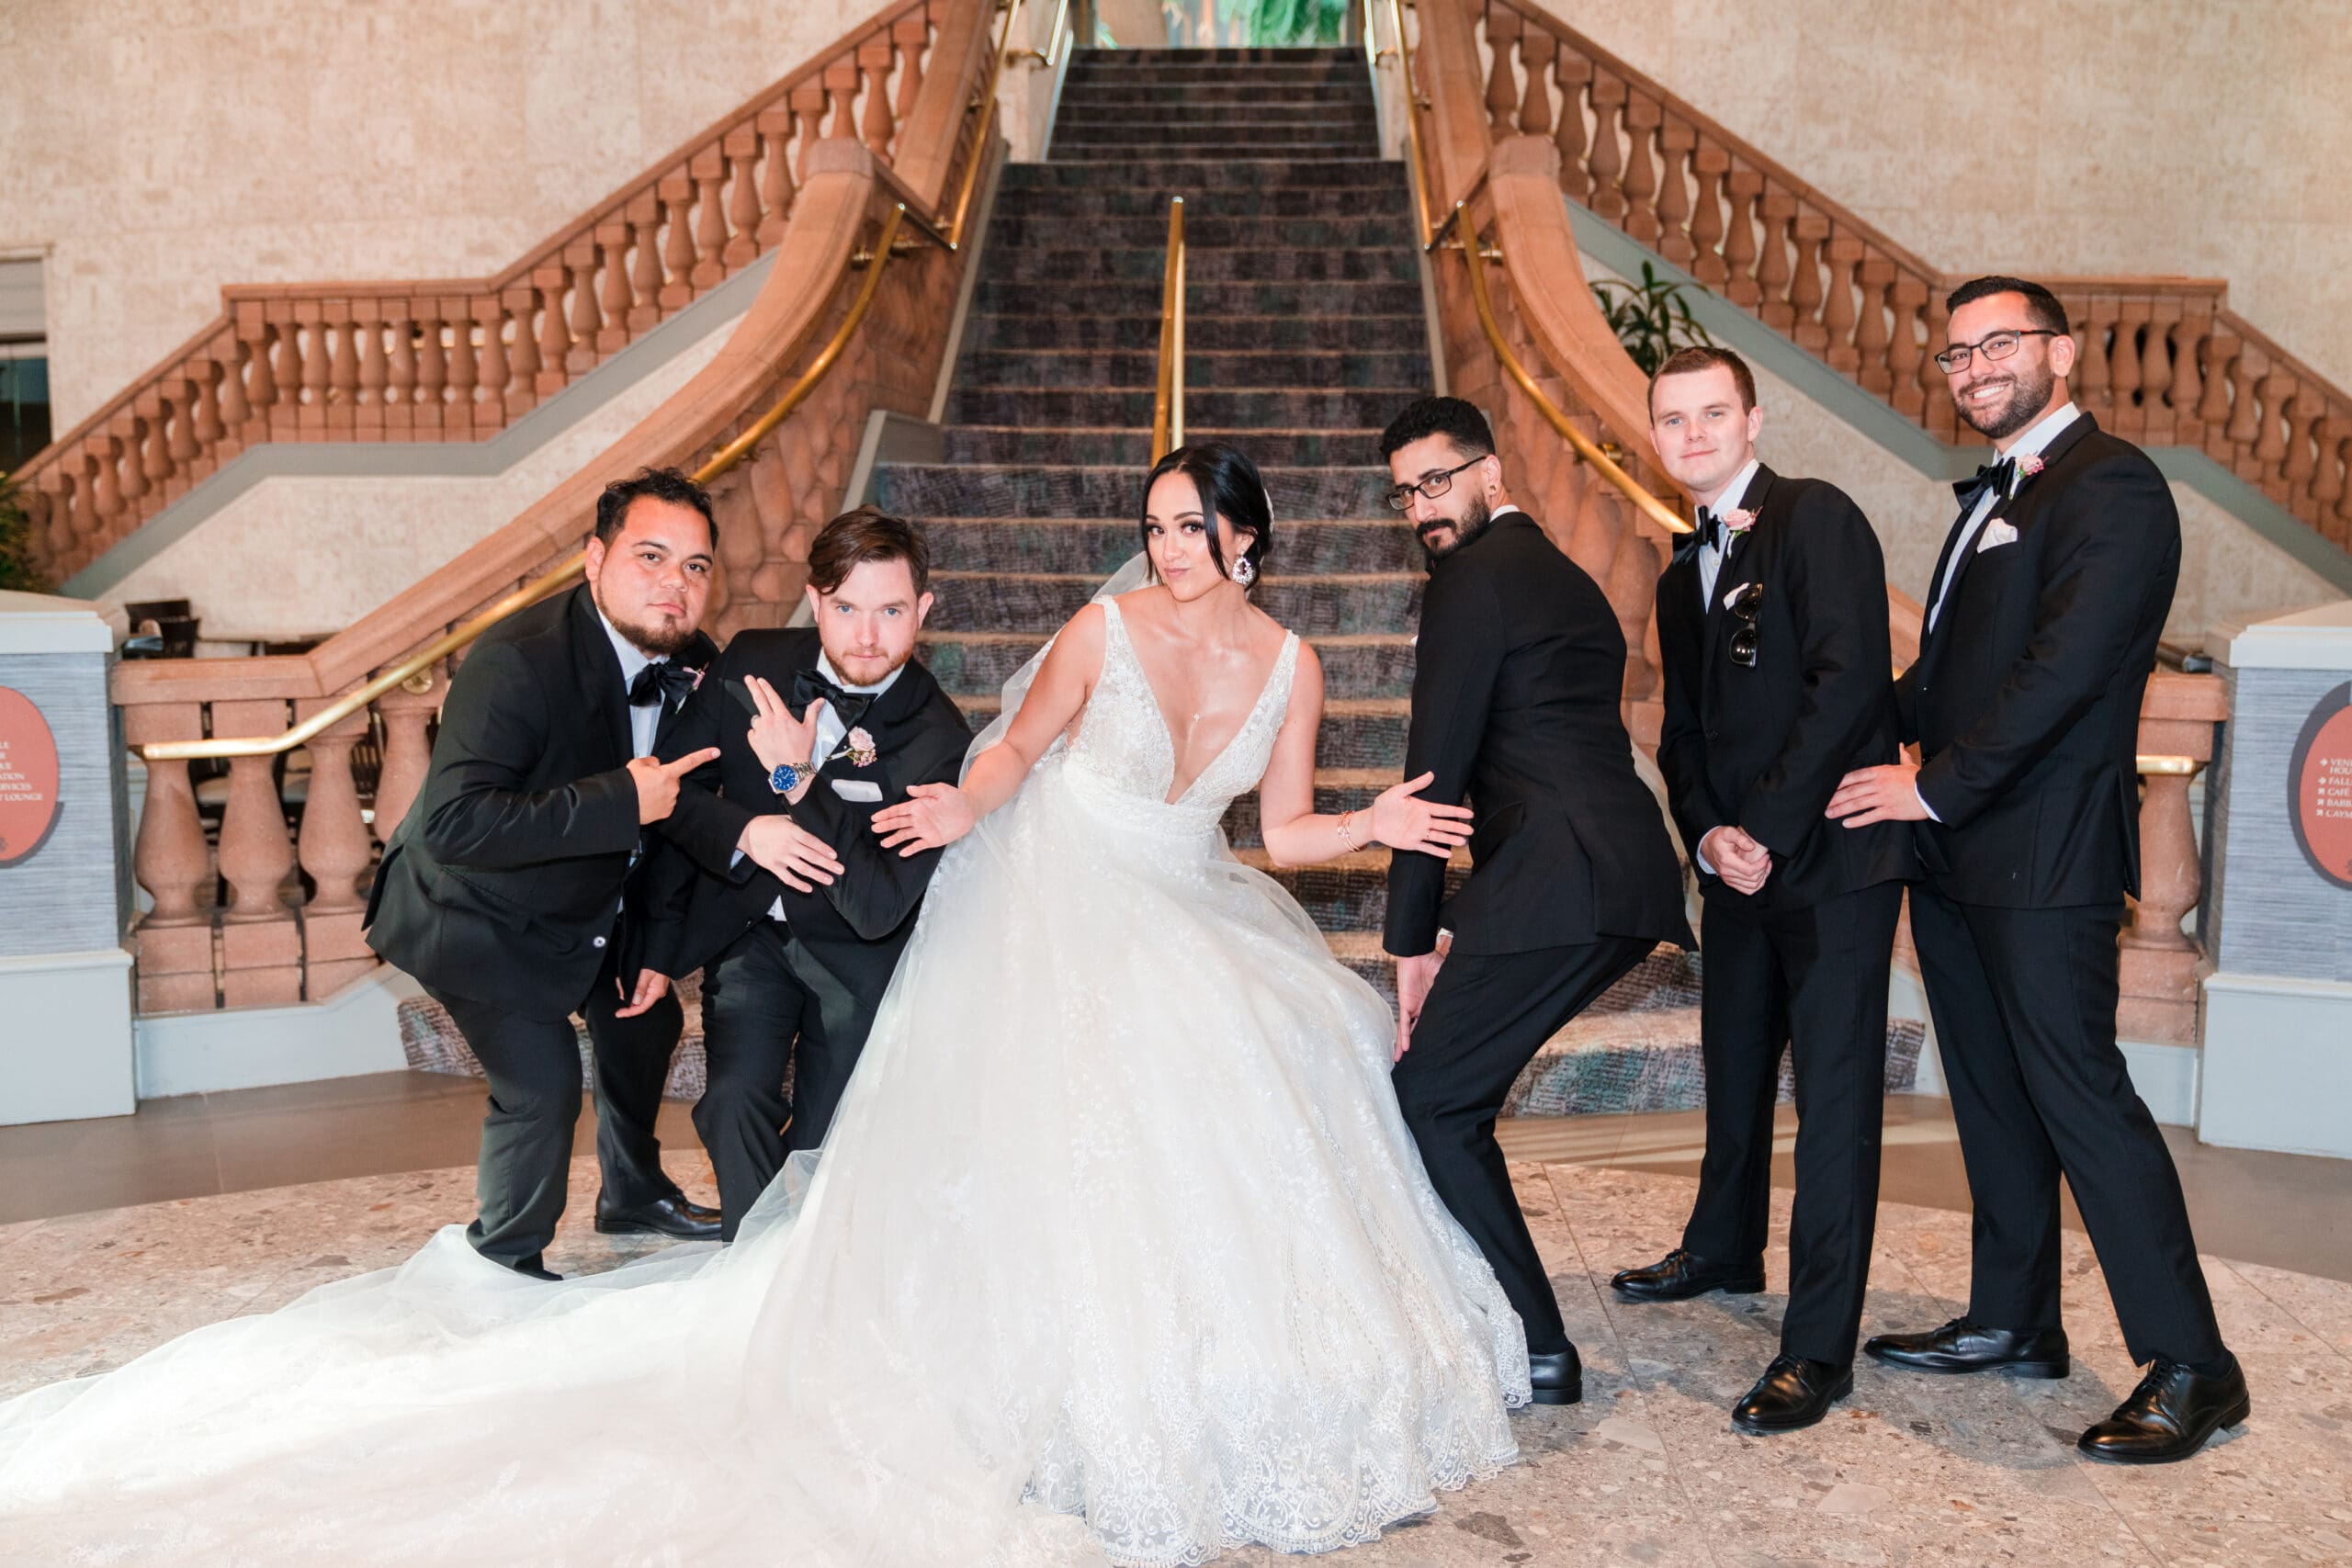 Bride posing with groomsmen at Royale Caribe Orlando, capturing a fun and personality-filled moment.